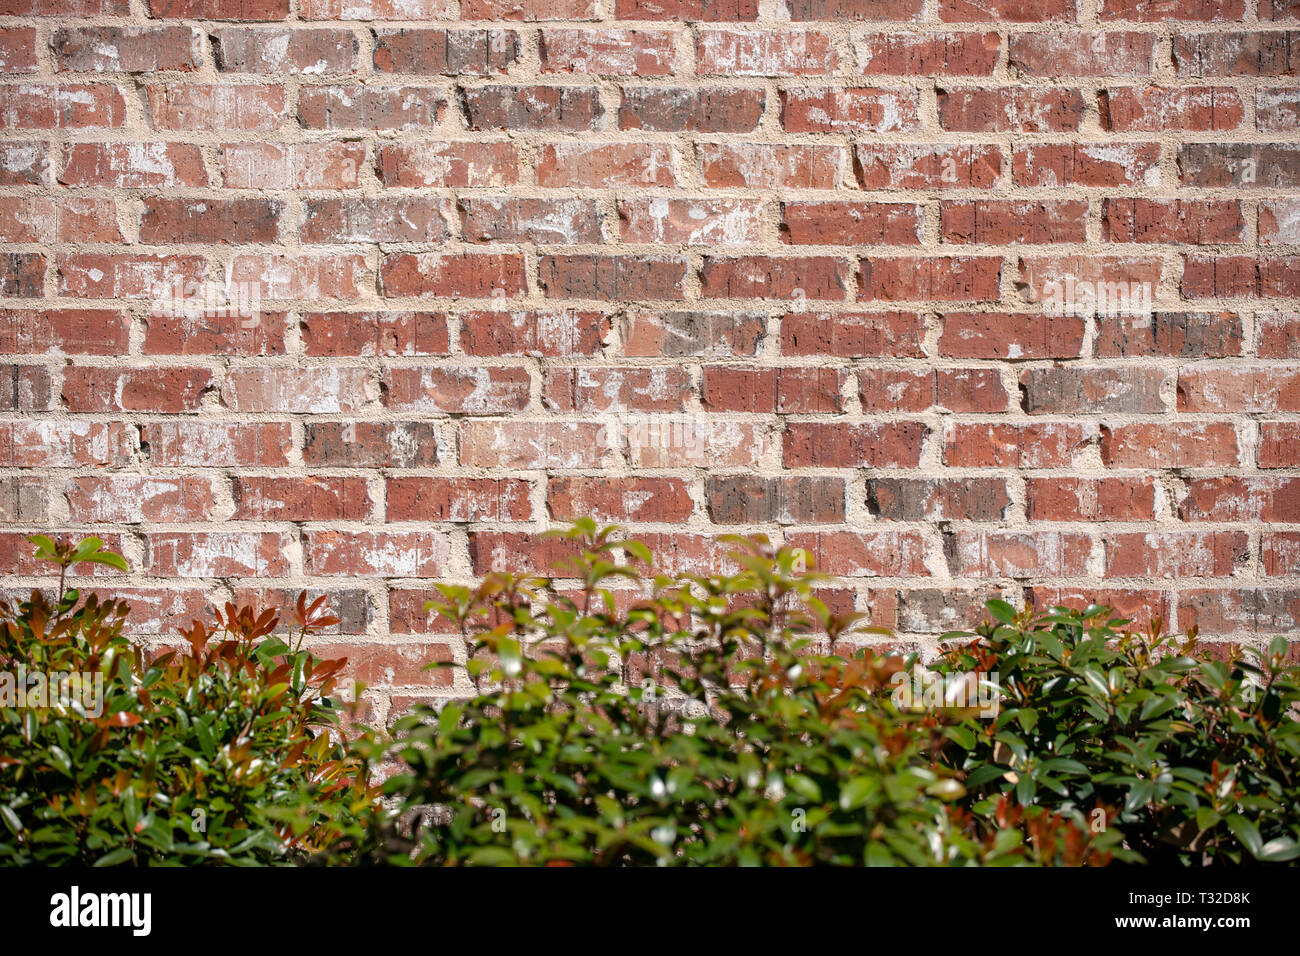 Brick wall background with green shrubs at the bottom, with copy space Stock Photo